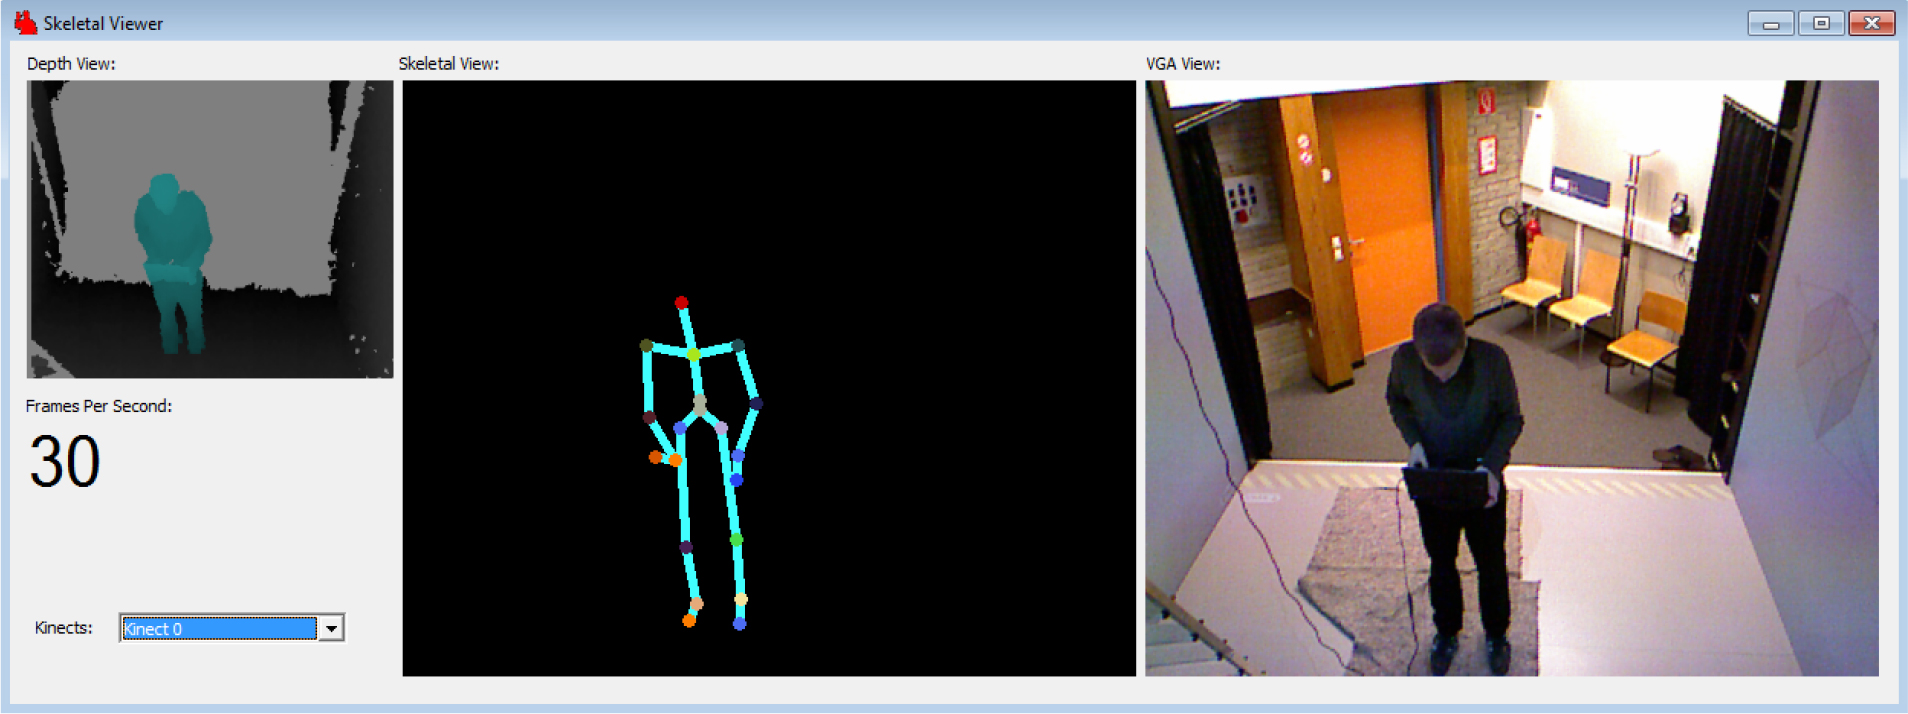 Sample screen shot of the test application 'SkeletalViewer' when the Kinect is placed above the front wall.